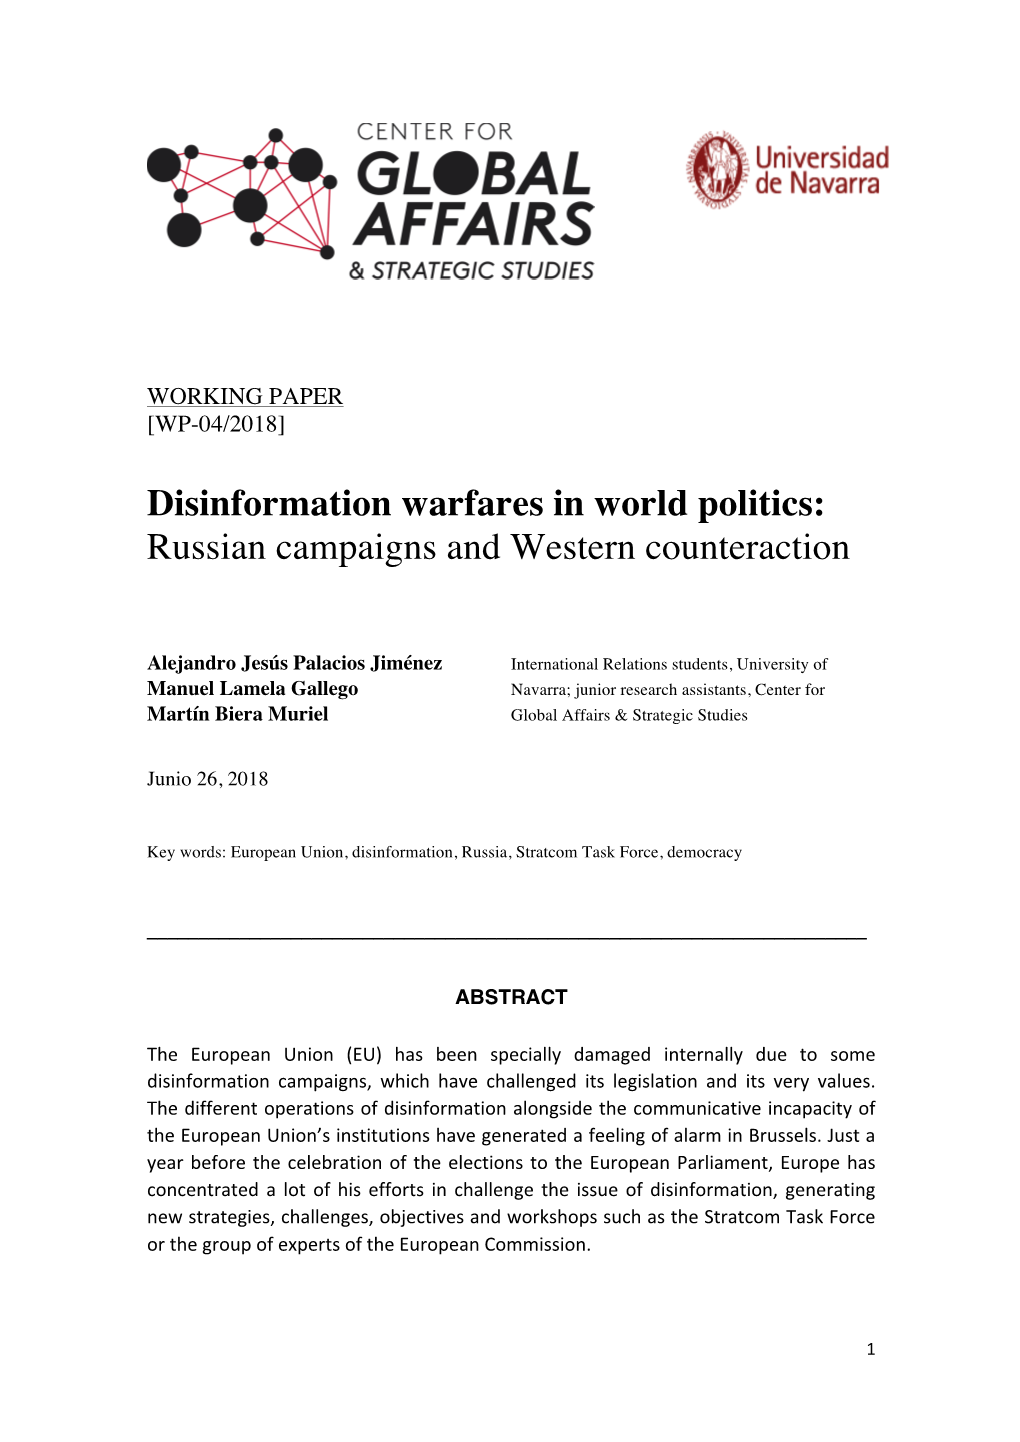 Disinformation Warfares in World Politics: Russian Campaigns and Western Counteraction